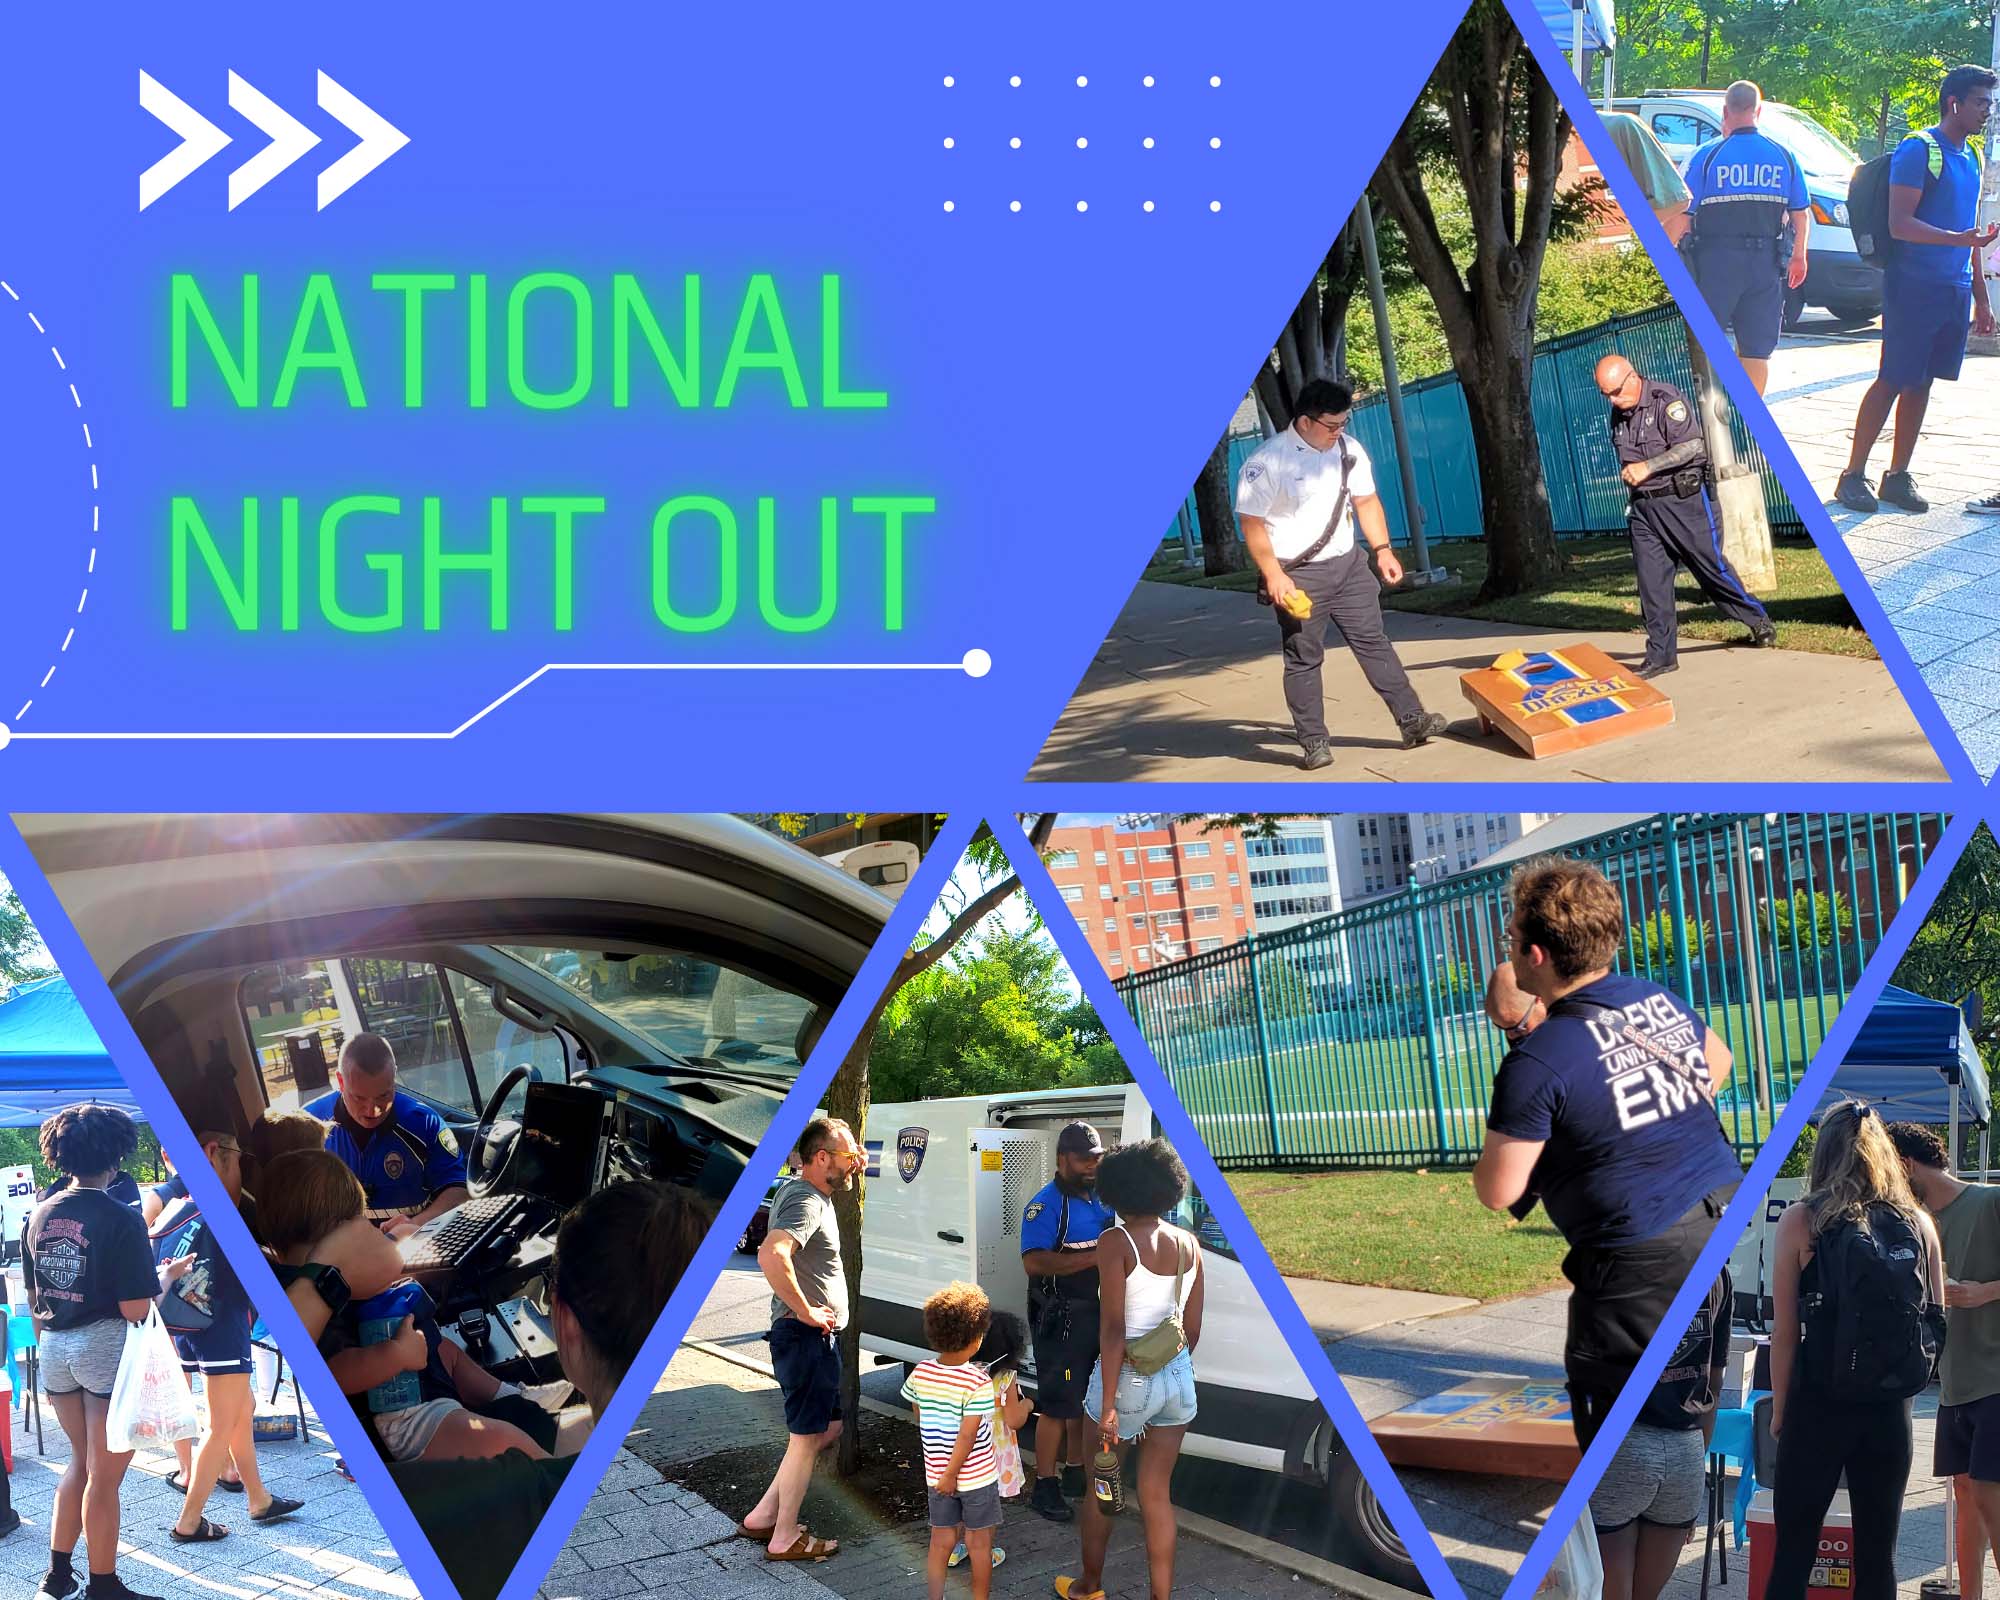 A compilation of images from National Night Out, including members of DPS and the community hanging out on the University City Campus.